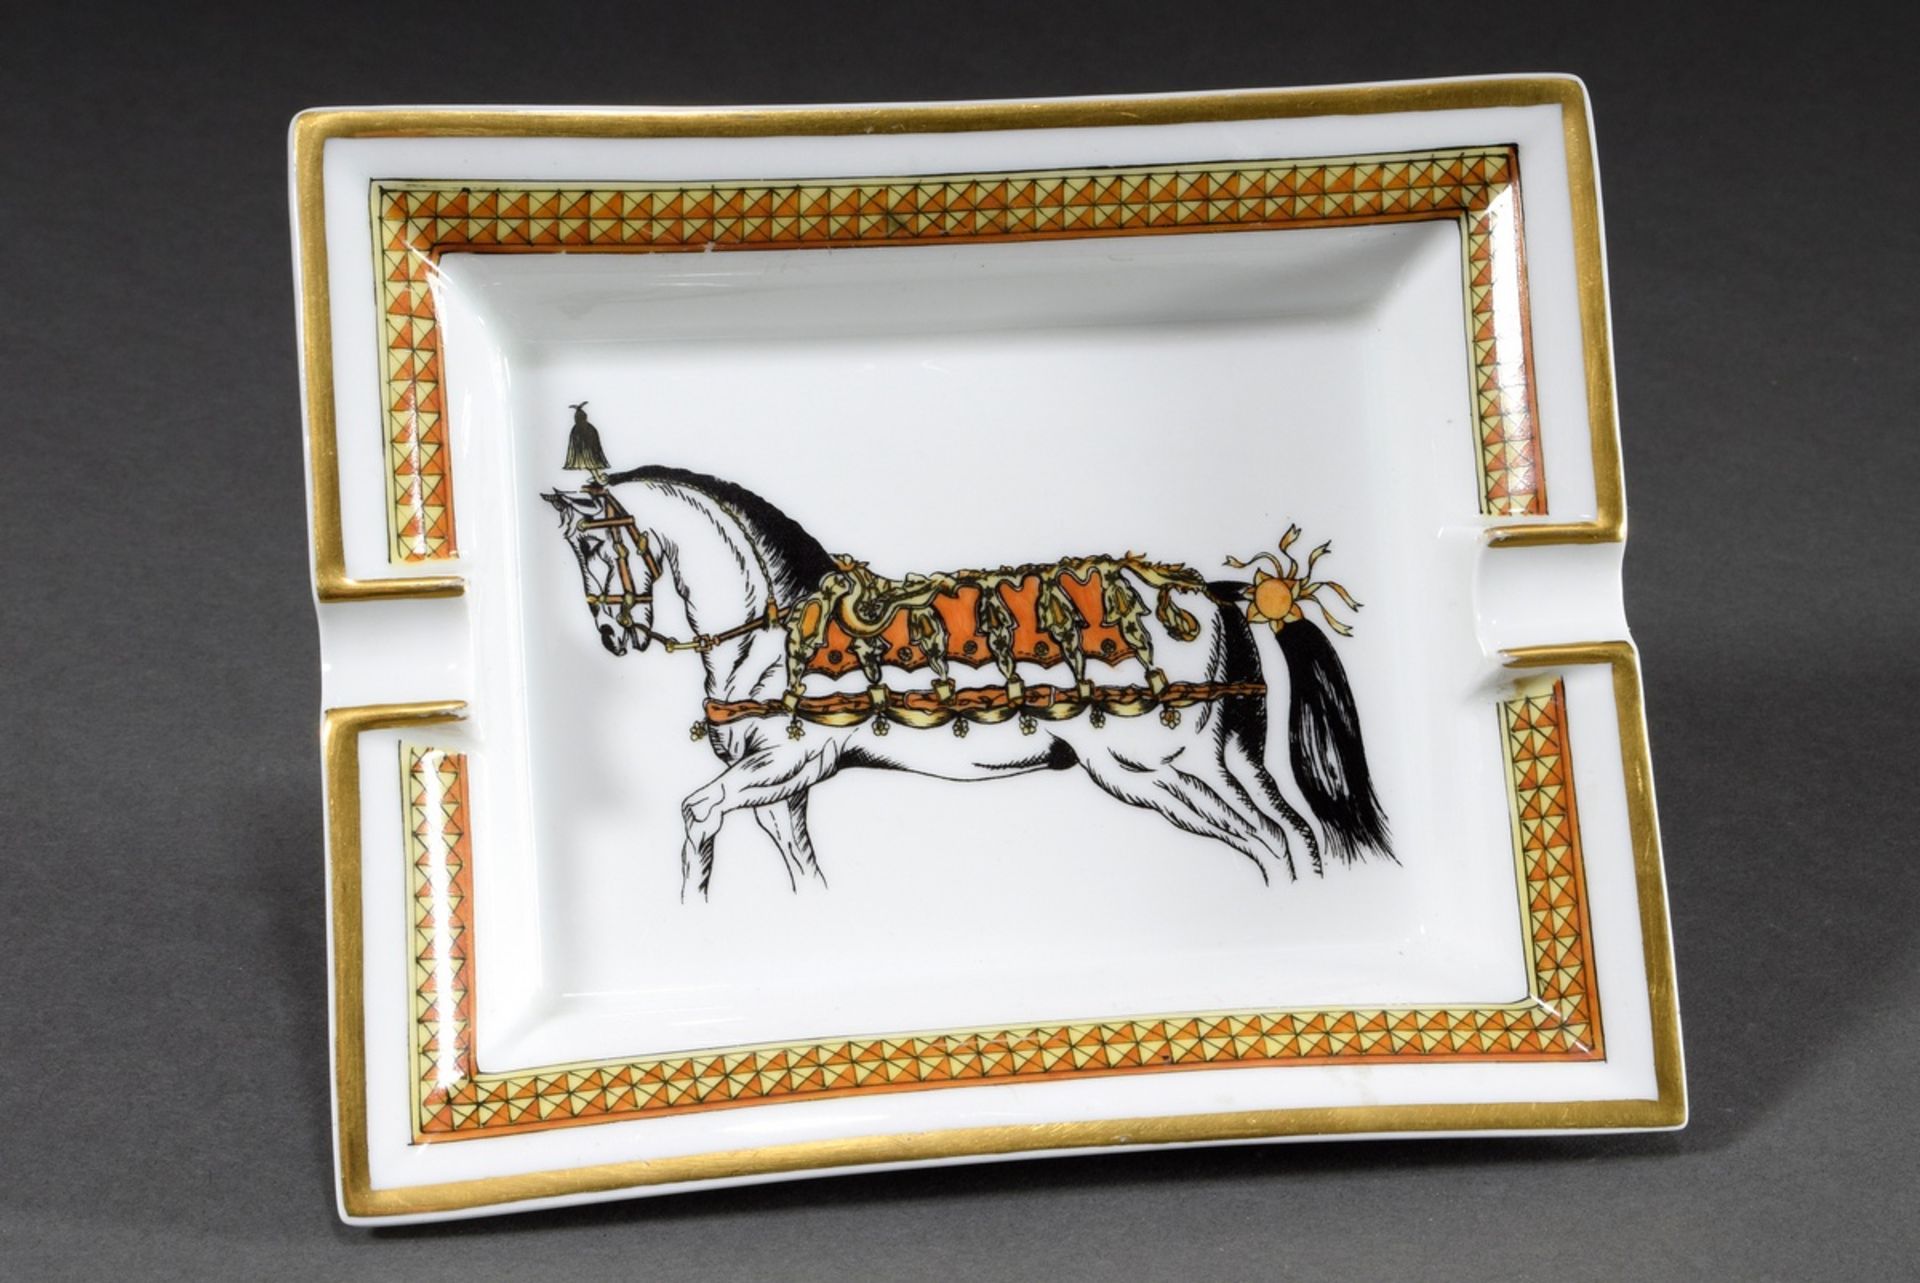 Hermès porcelain ashtray with overprint decoration "Parade horse" and hand colored rim, 1990s, 4x19